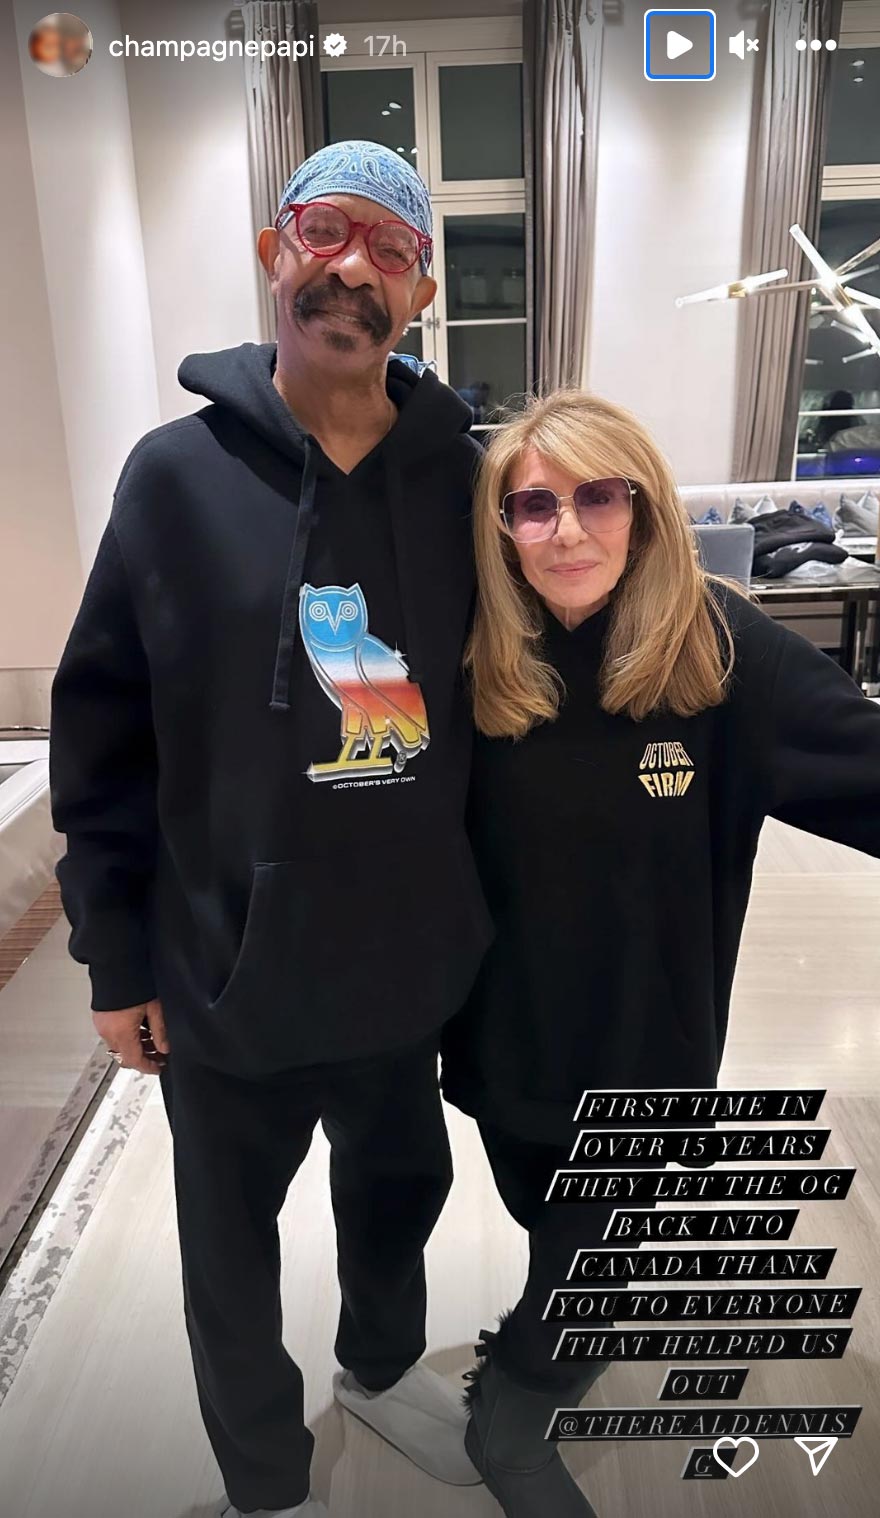 Drake’s Parents Pose Together During Father’s 1st Trip to Canada in 15 Years: ‘They Let the OG Back In’